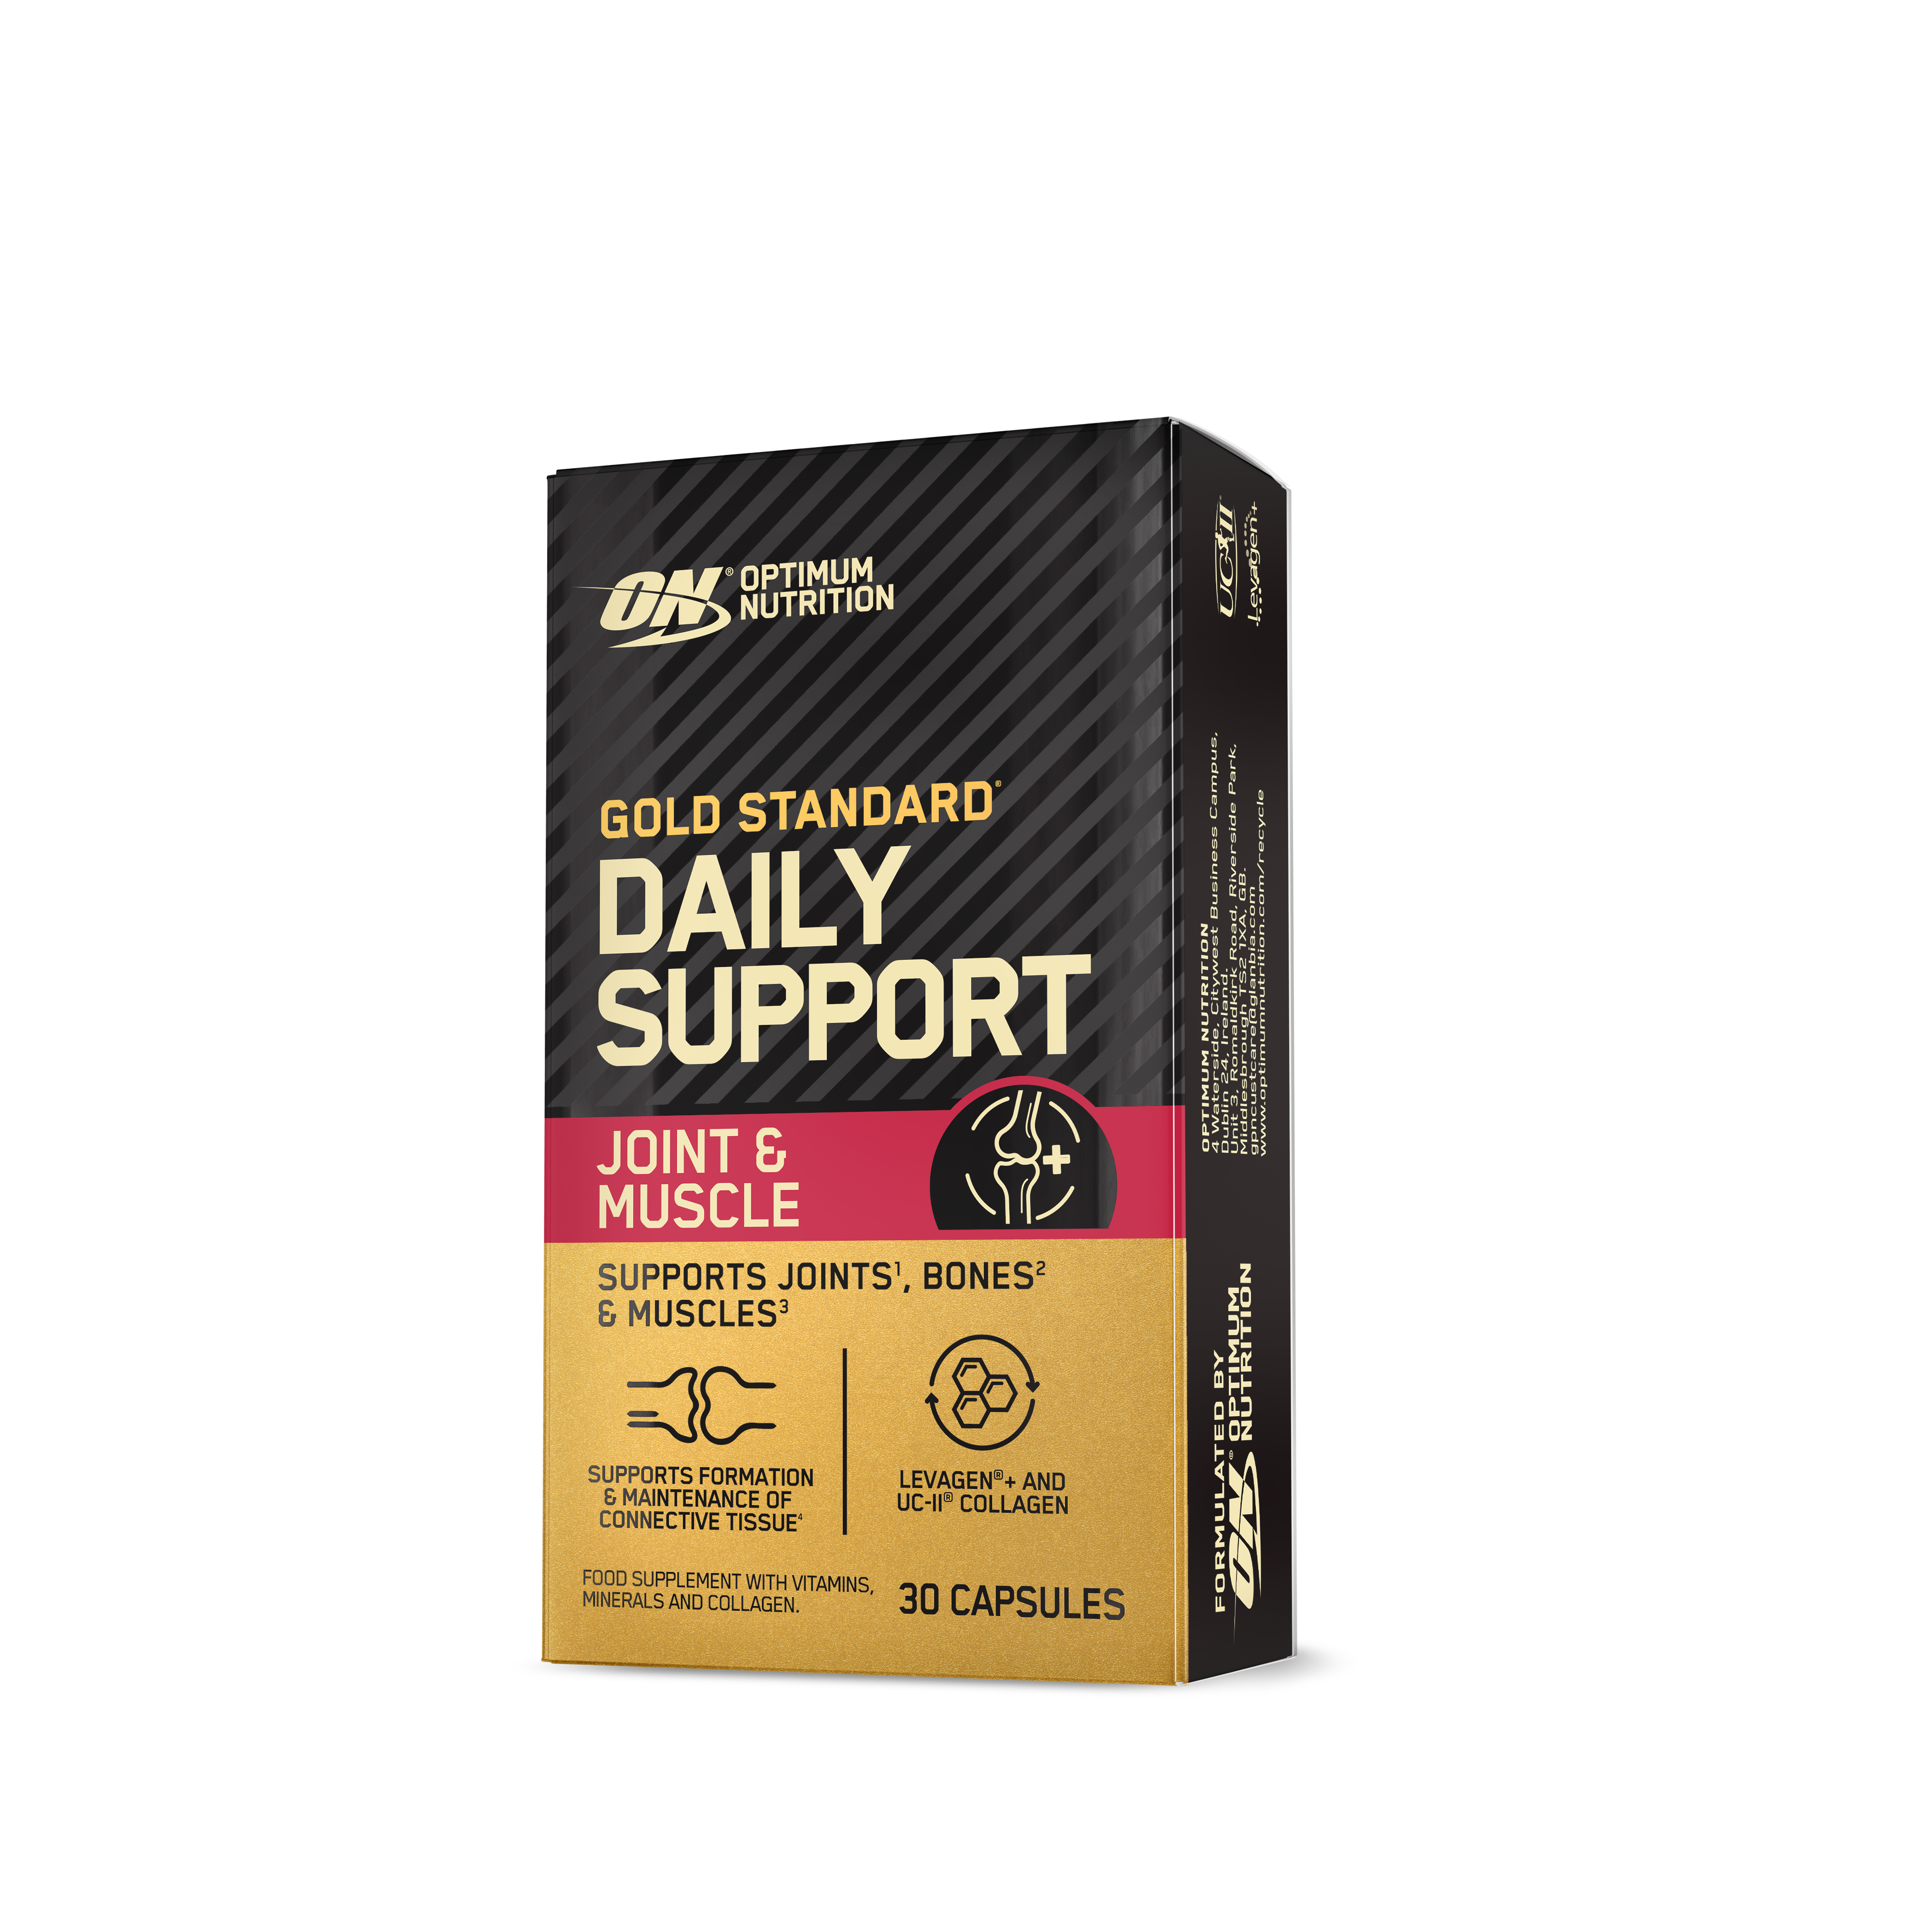 Optimum Nutrition UK Optimum Nutrition Gold Standard Daily Support Joint & Muscle 30 Capsules (18 g)